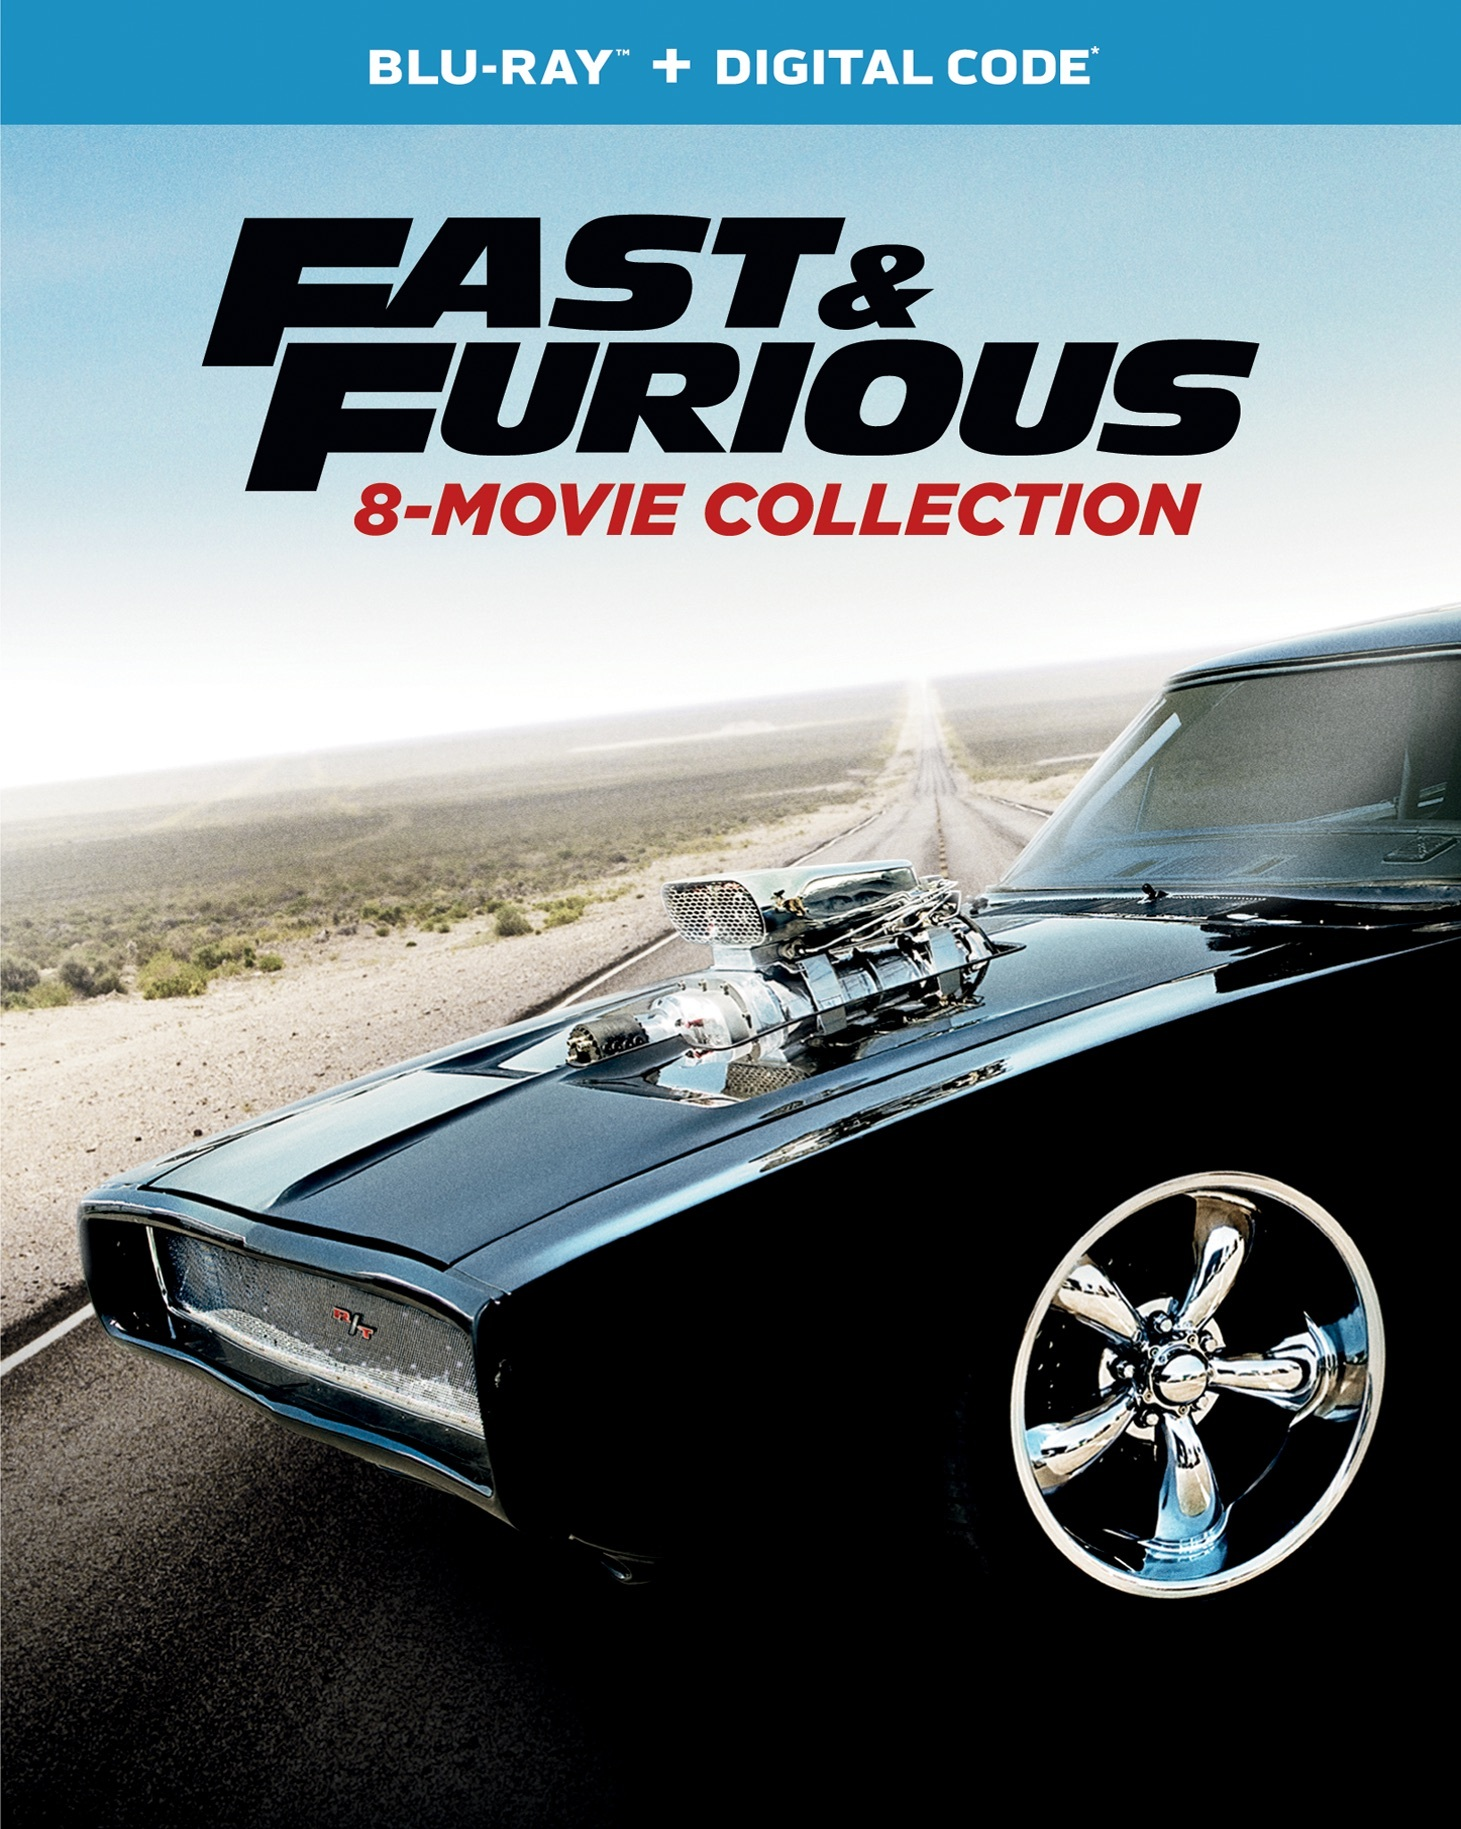 Buy Fast & Furious: 8-movie Collection Blu-ray | GRUV $23.99 plus tax at Gruv